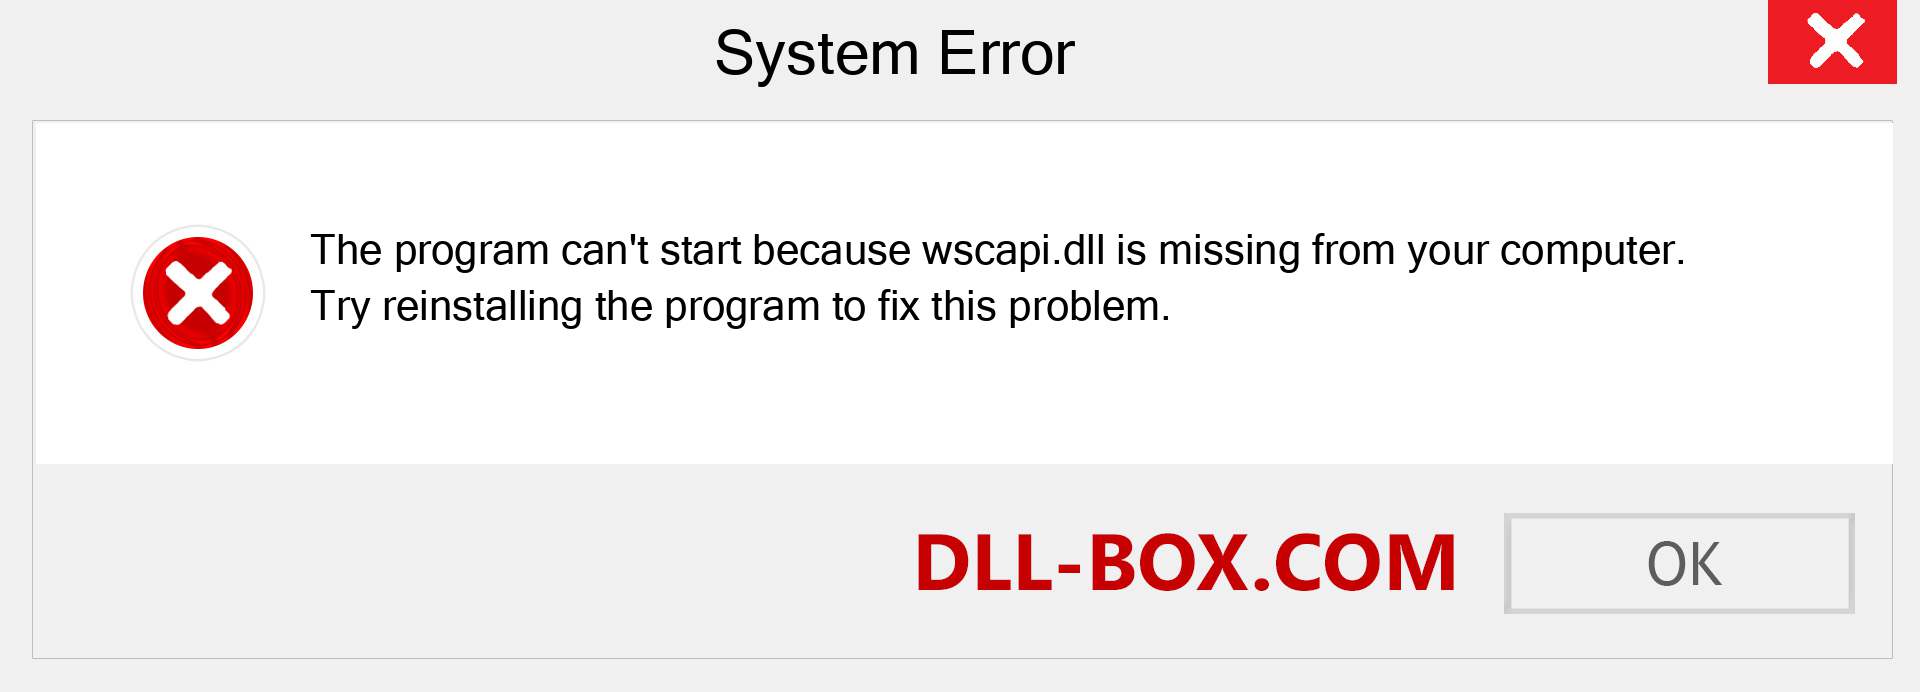  wscapi.dll file is missing?. Download for Windows 7, 8, 10 - Fix  wscapi dll Missing Error on Windows, photos, images